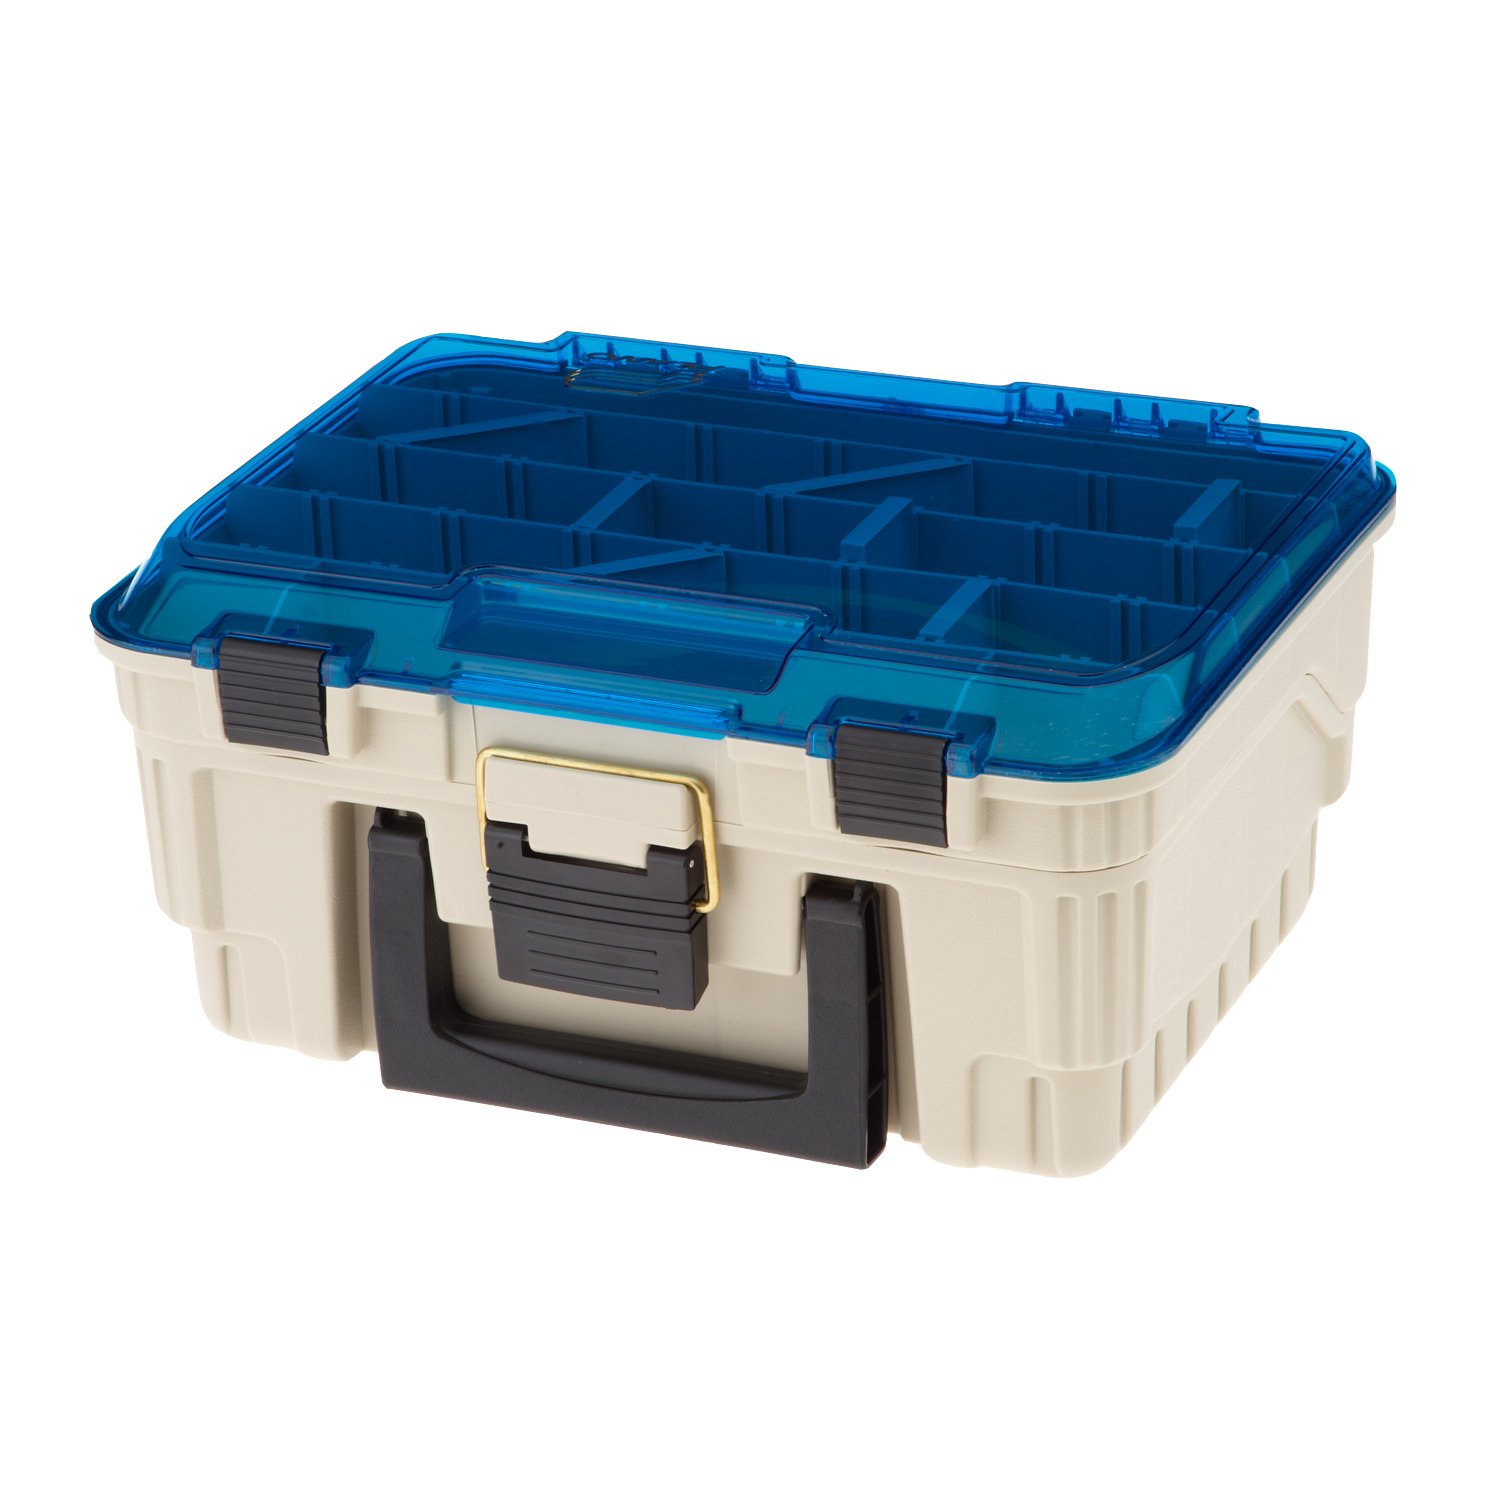  Plano 1349-00 Two Level Magnum 3449 Tackle Box